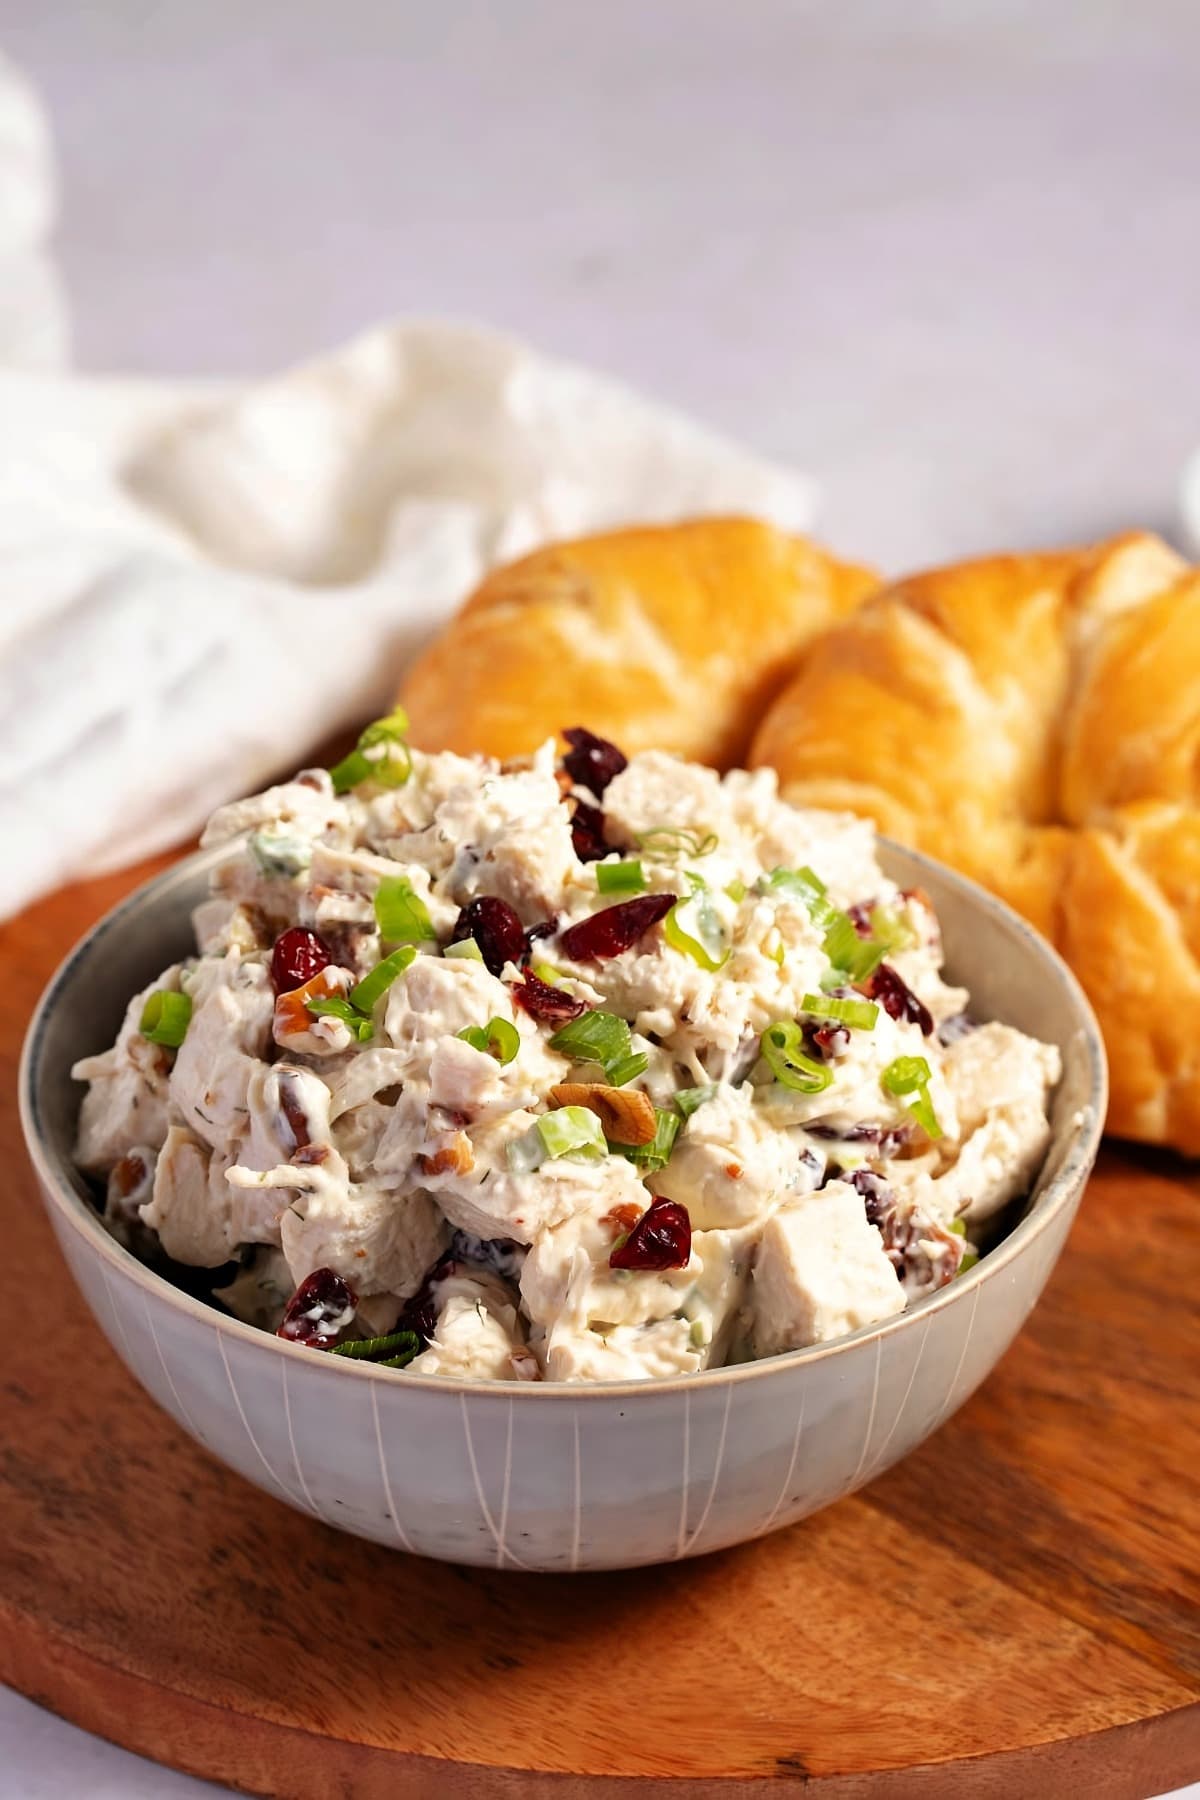 Fresh Breads with a bowl of salad with chicken, mayonnaise, green onions, dried cranberries, chopped pecans, lime juice, and dried dill weed.